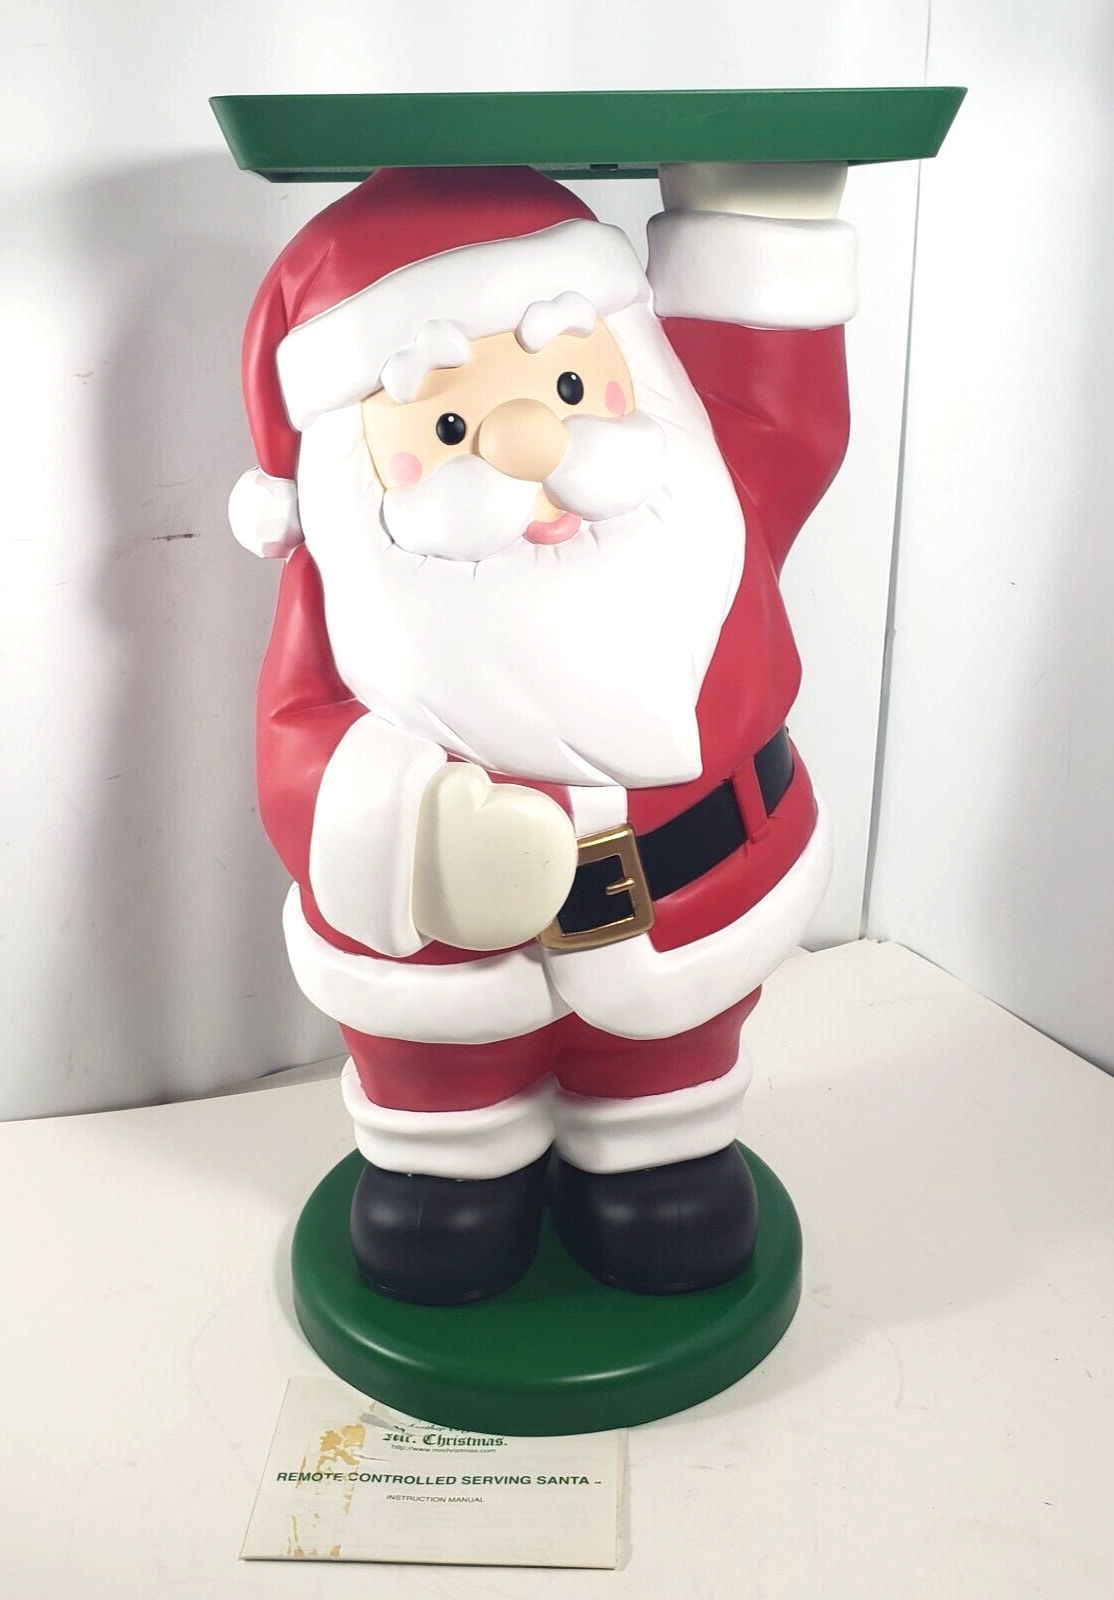 Mr. Christmas Serving Santa Tray Stand 2001 OEM REPLACEMENT BODY ONLY - NO MOTOR - $29.99